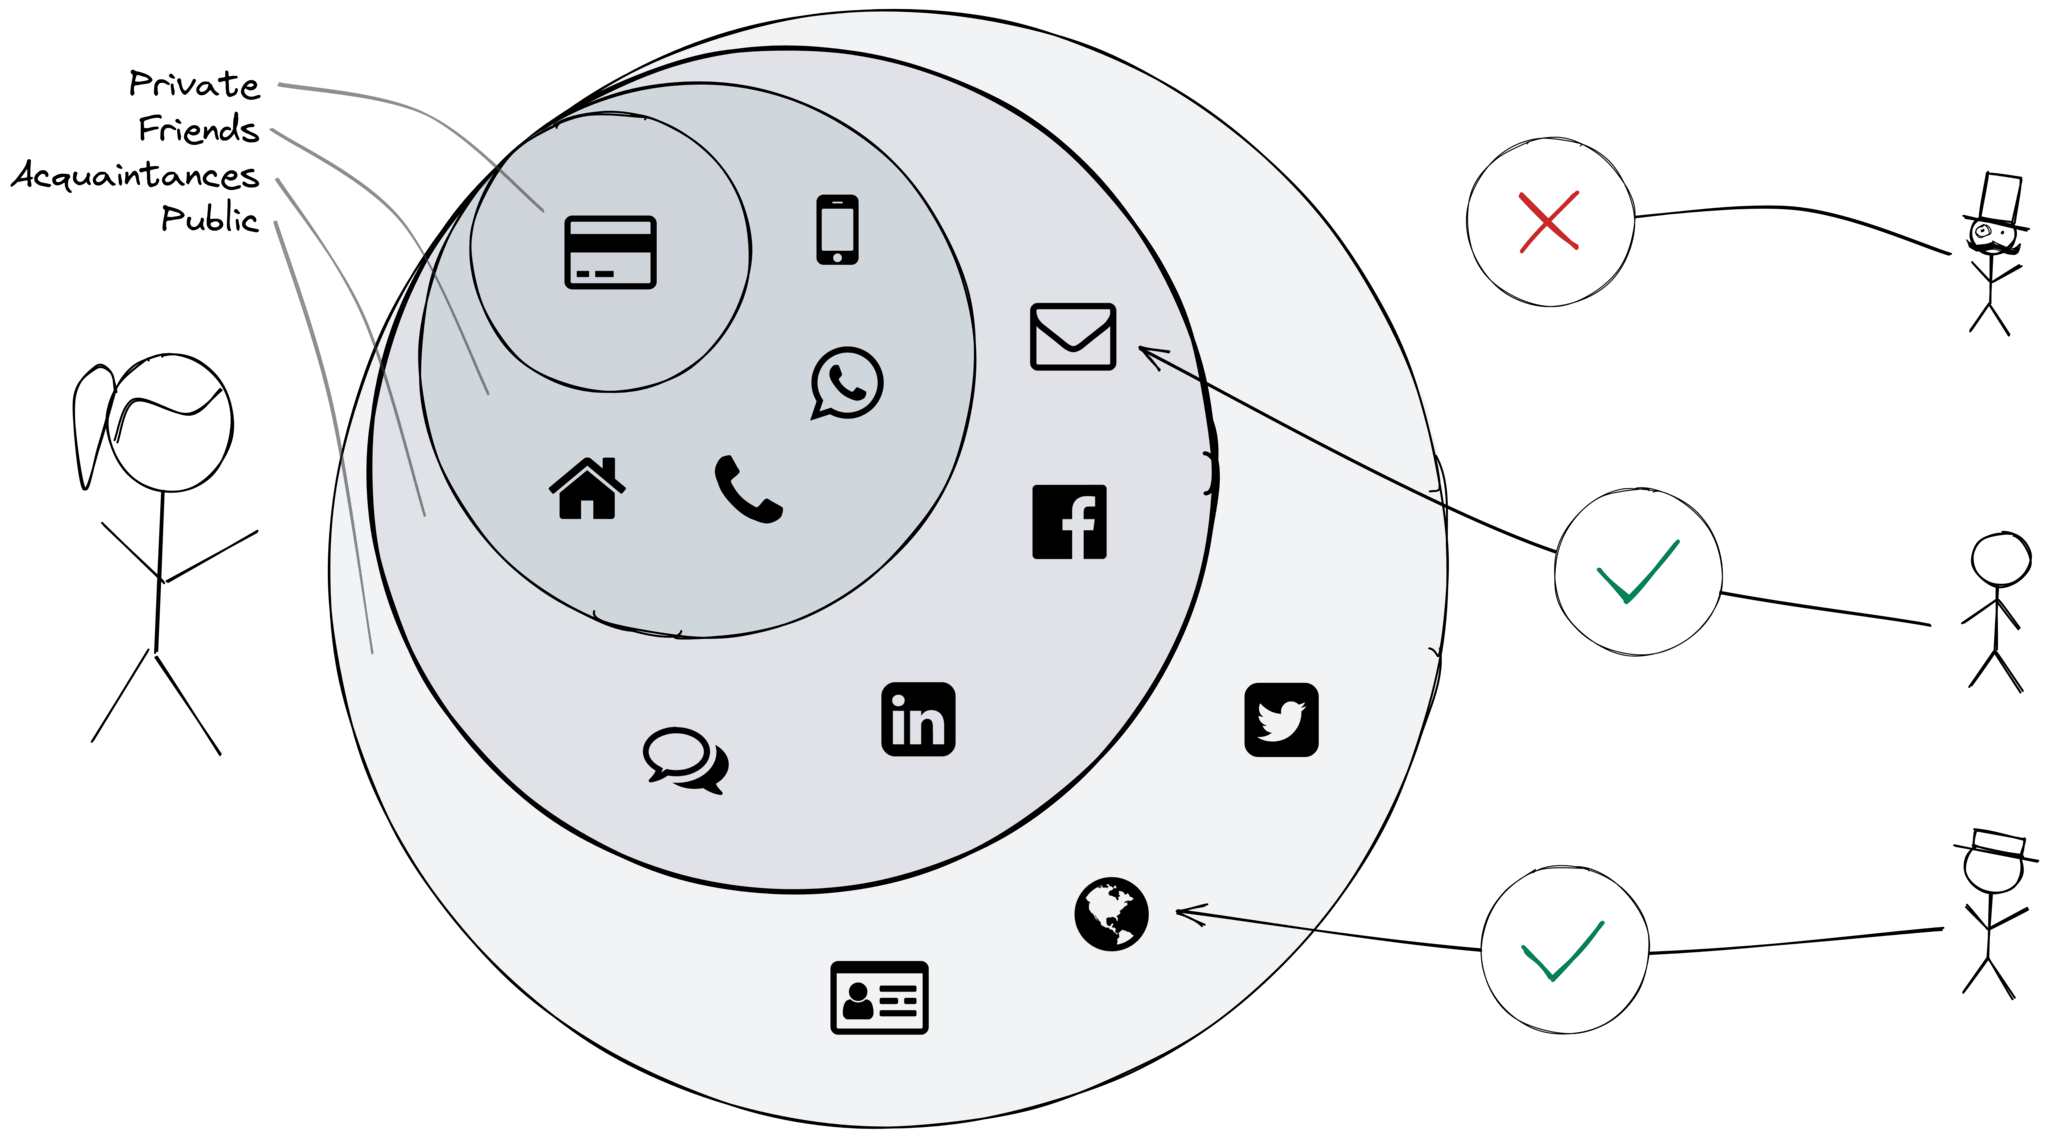 An example with four different circles, containing different contact information, and allowing access only to connected users